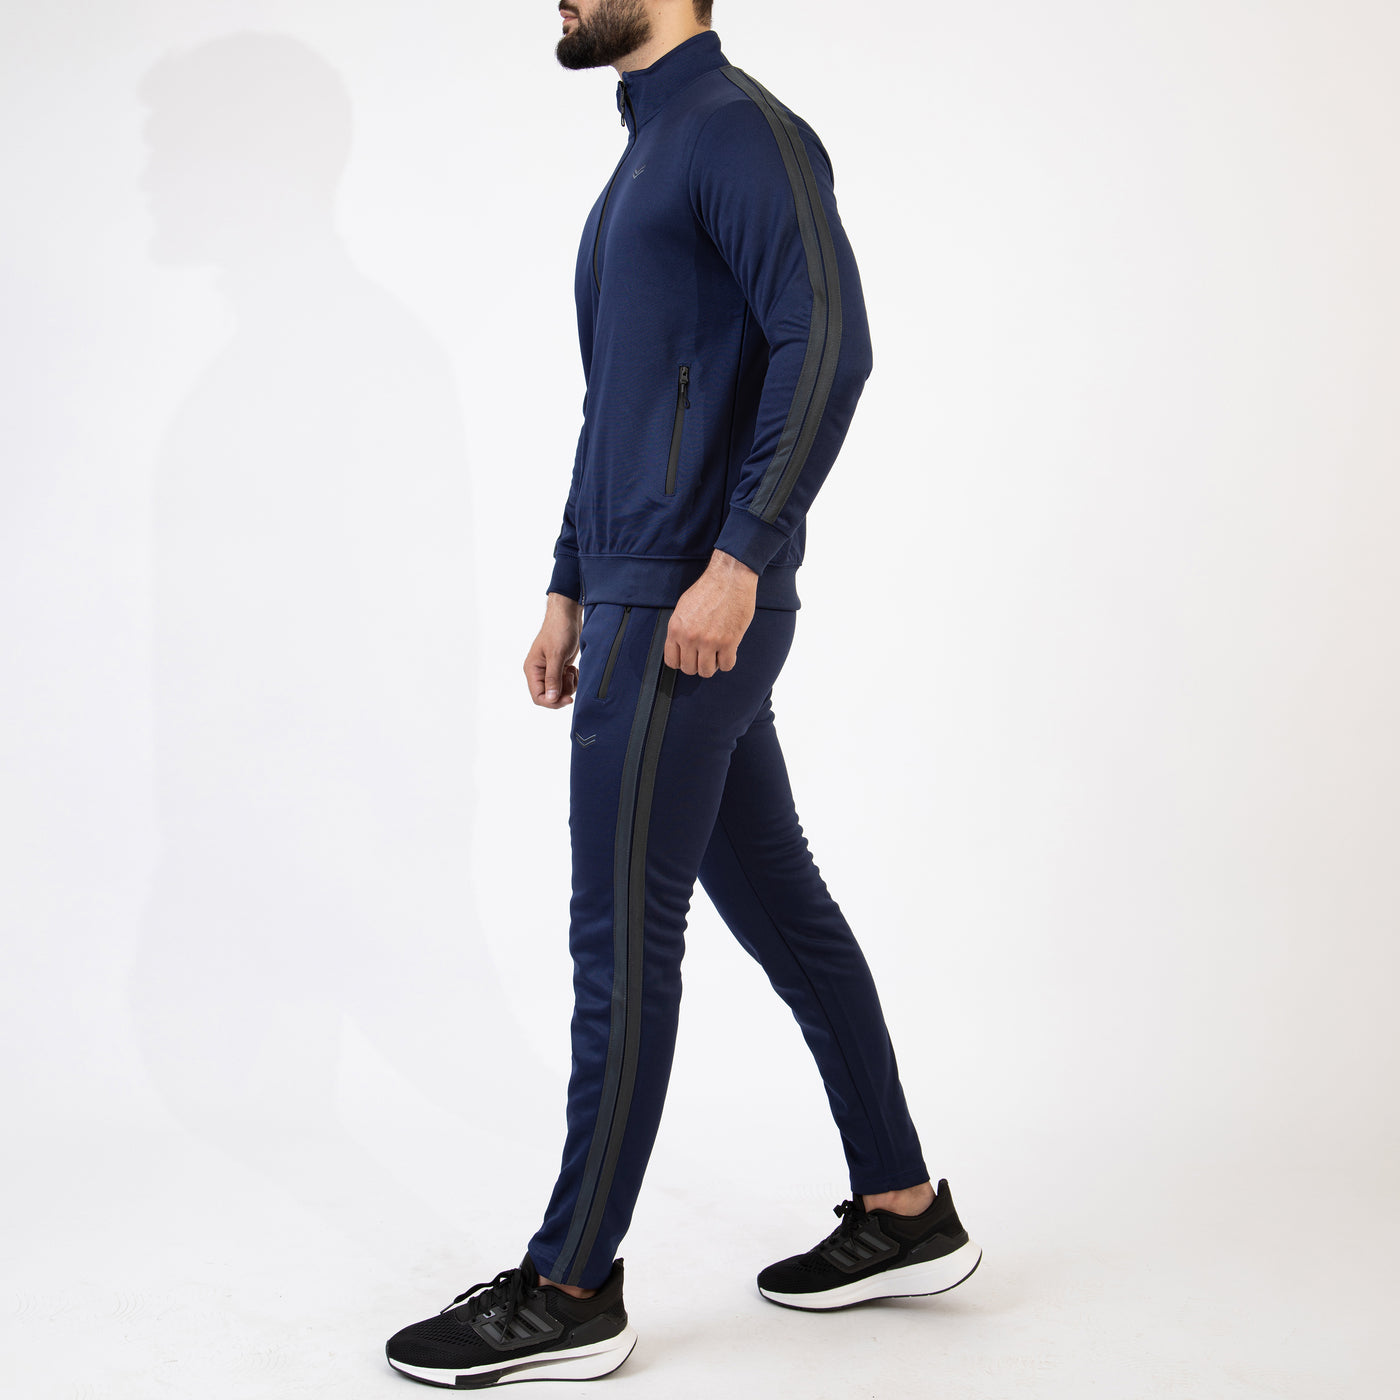 Navy Mock-Neck Zipper Tracksuit with Two Gray Stripes